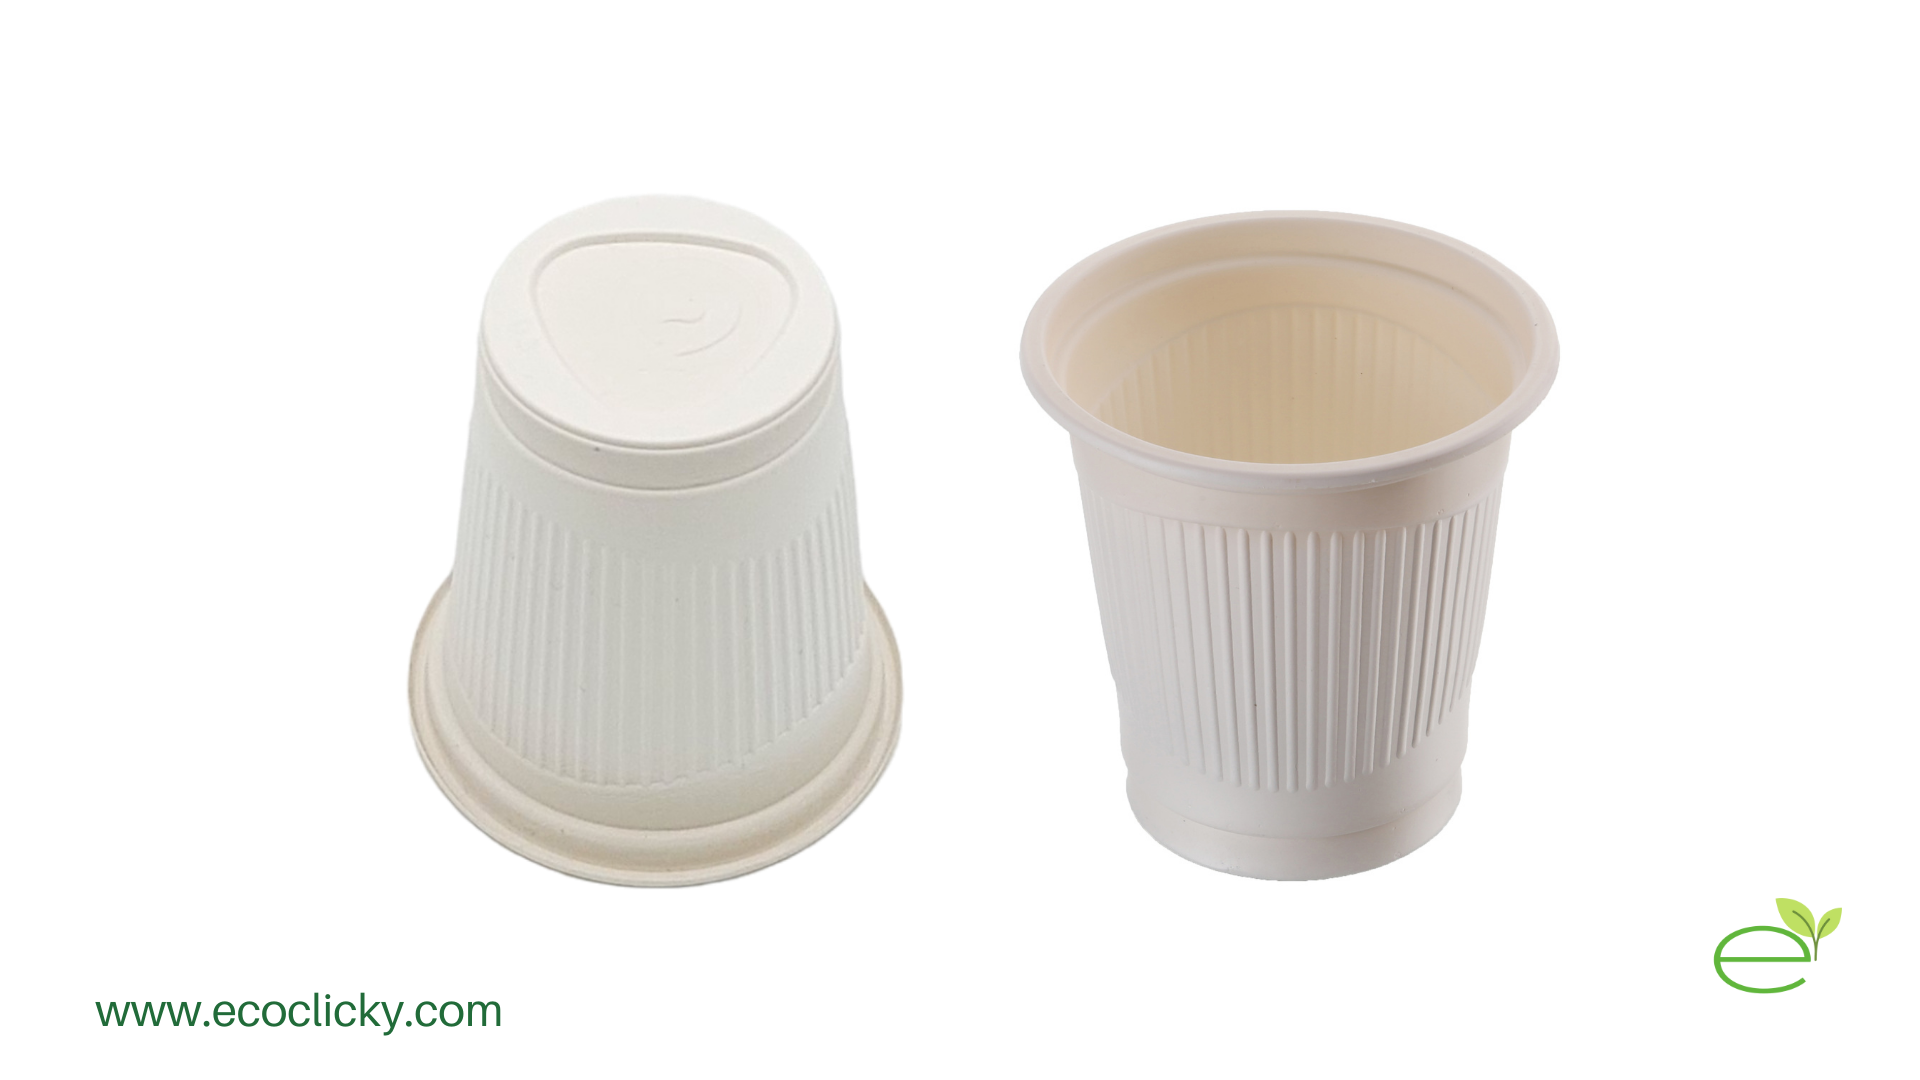 Foam Disposables: Cups, Lids, Trays, & More For Restaurants